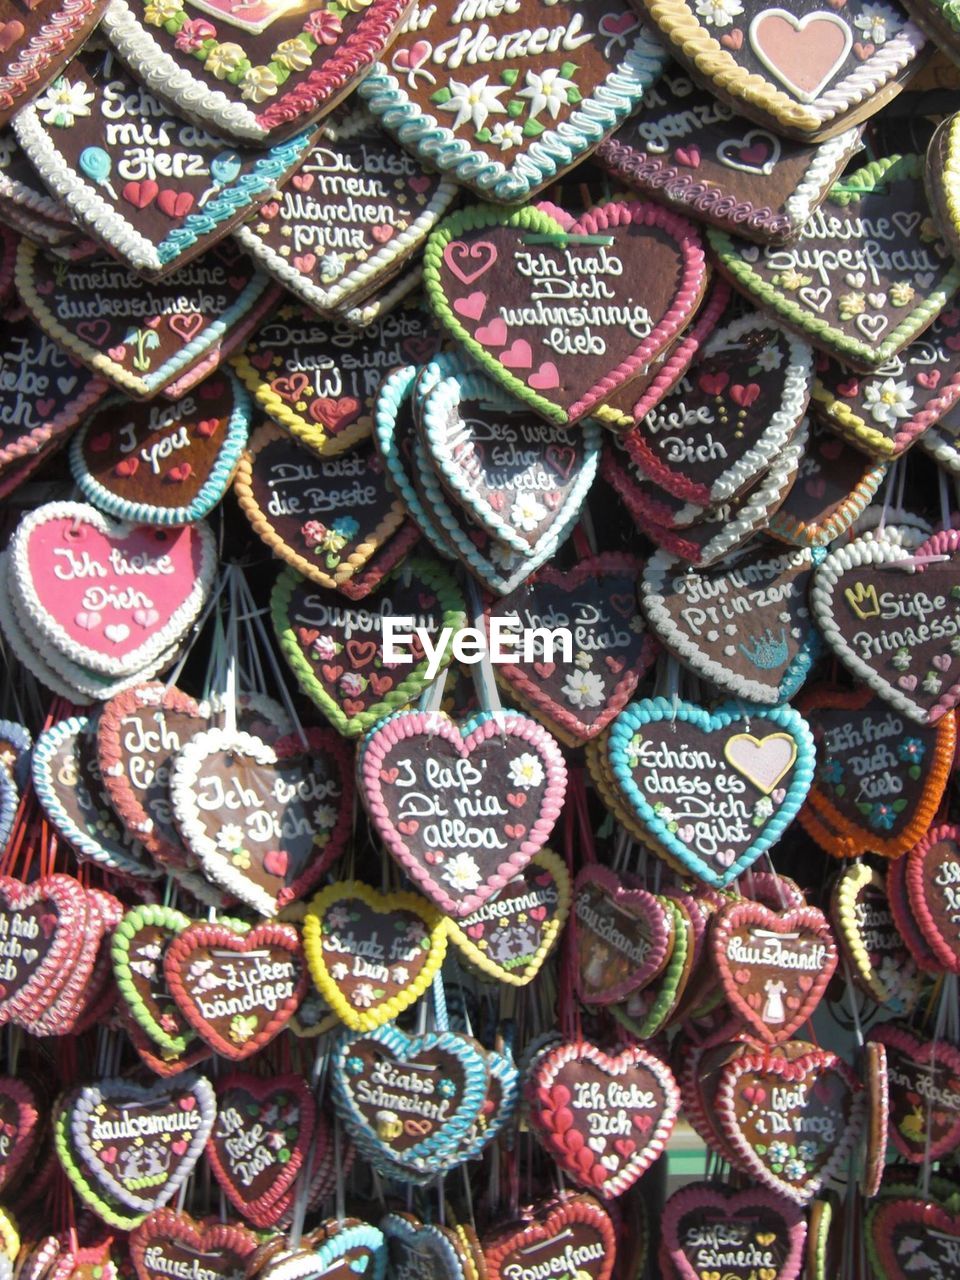 Full frame shot of heart shape decorations with text for sale in market